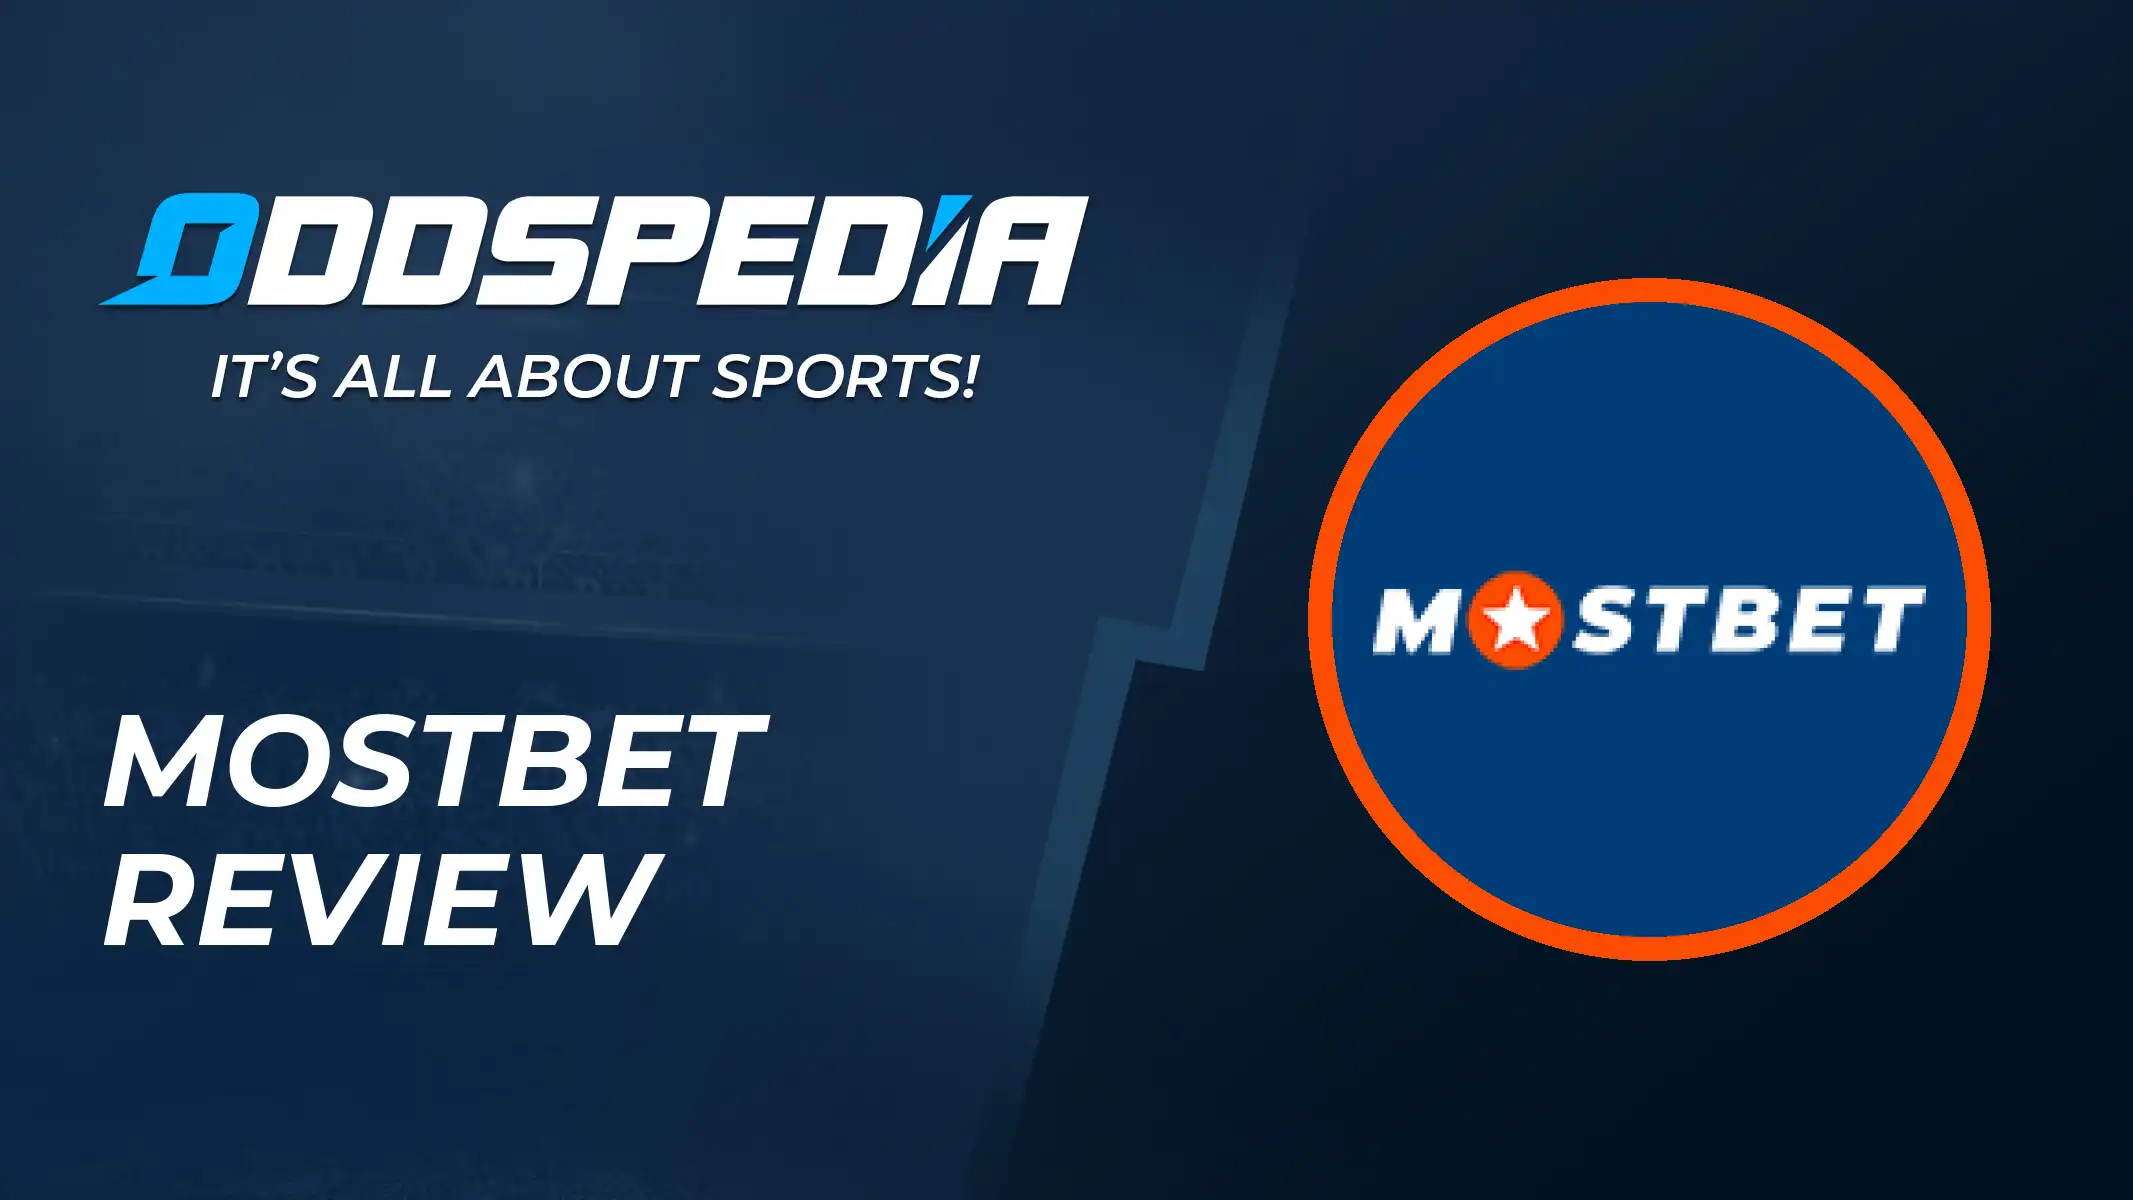 7 Days To Improving The Way You Mostbet Online Casino Company